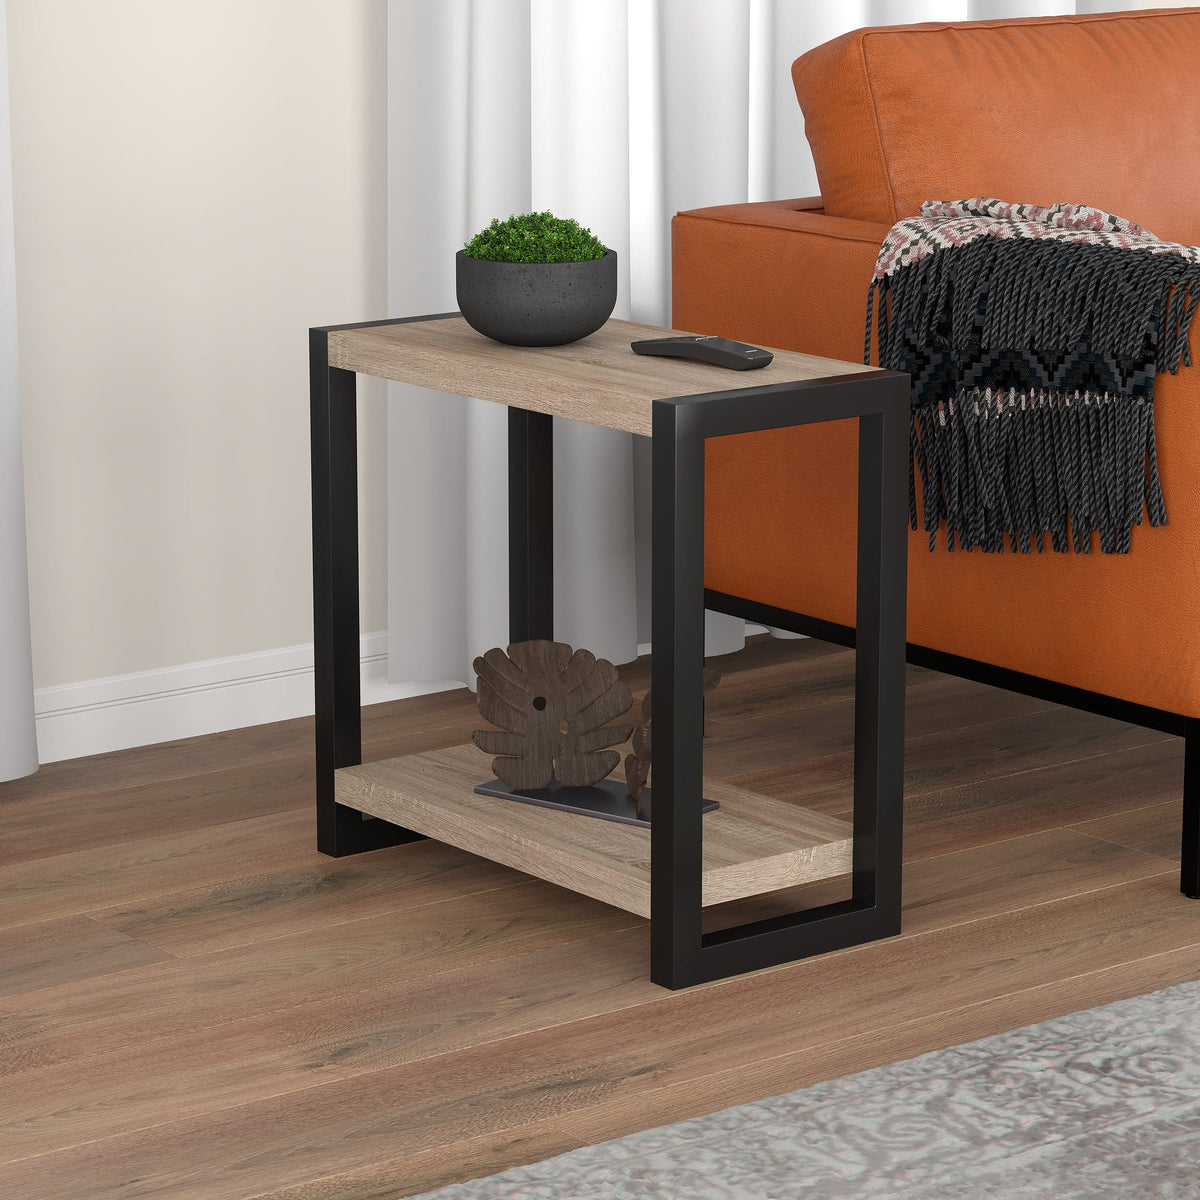 Accent Table with 1 Shelf